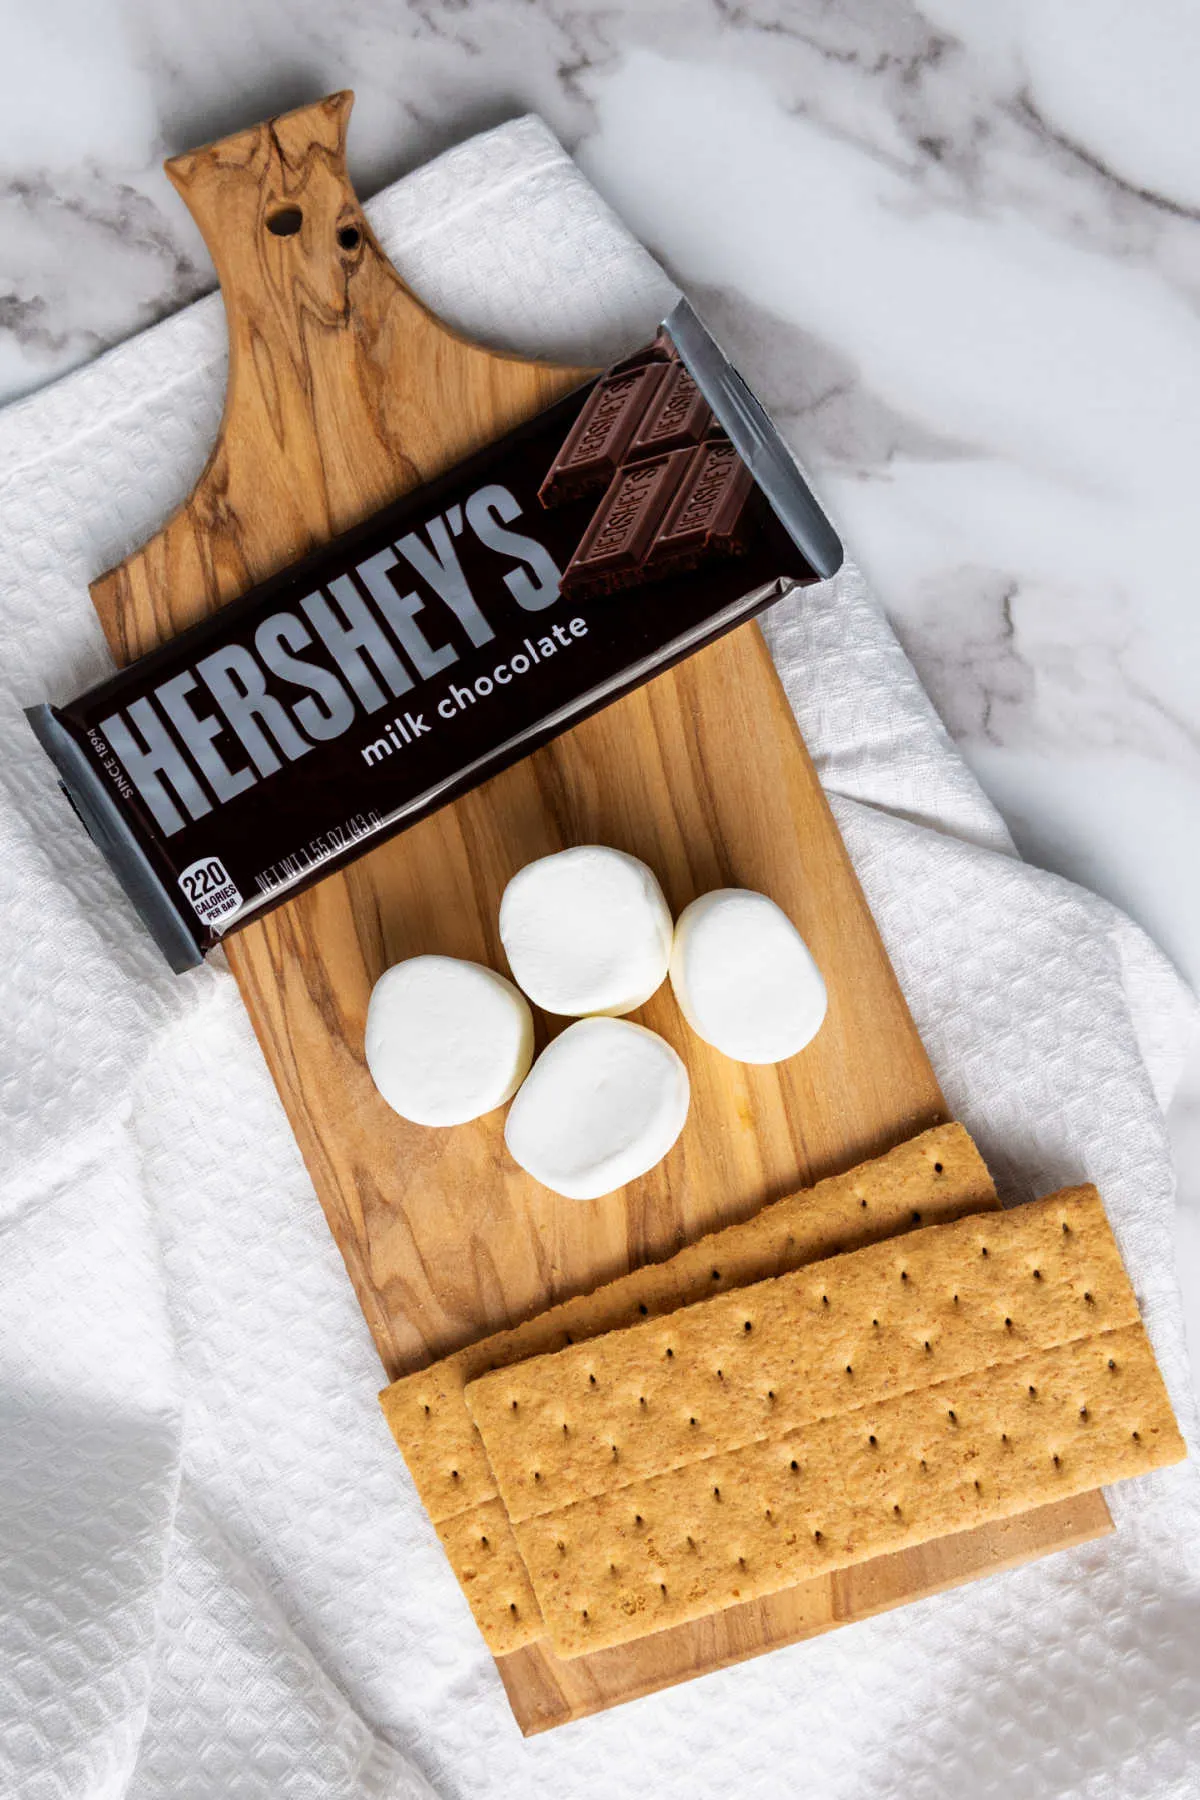 Ingredients: Hershey's bars, marshmallows and graham crackers ready to be made into air fryer smores.